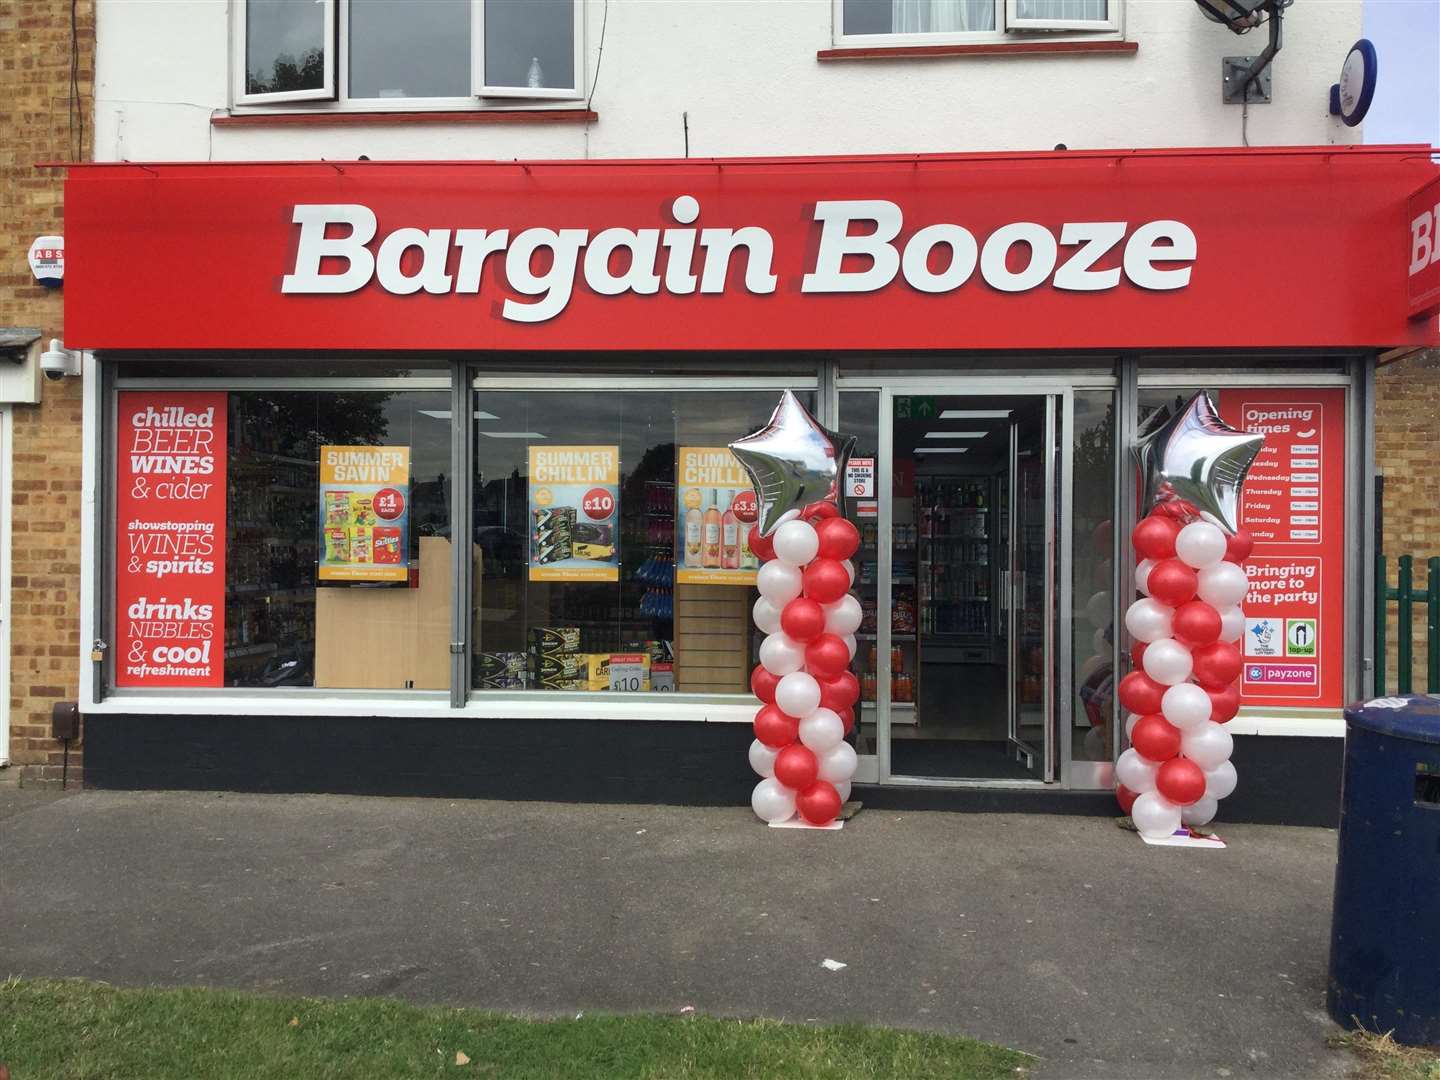 Bargain Booze's stores include this franchised branch in Shepway, Maidstone